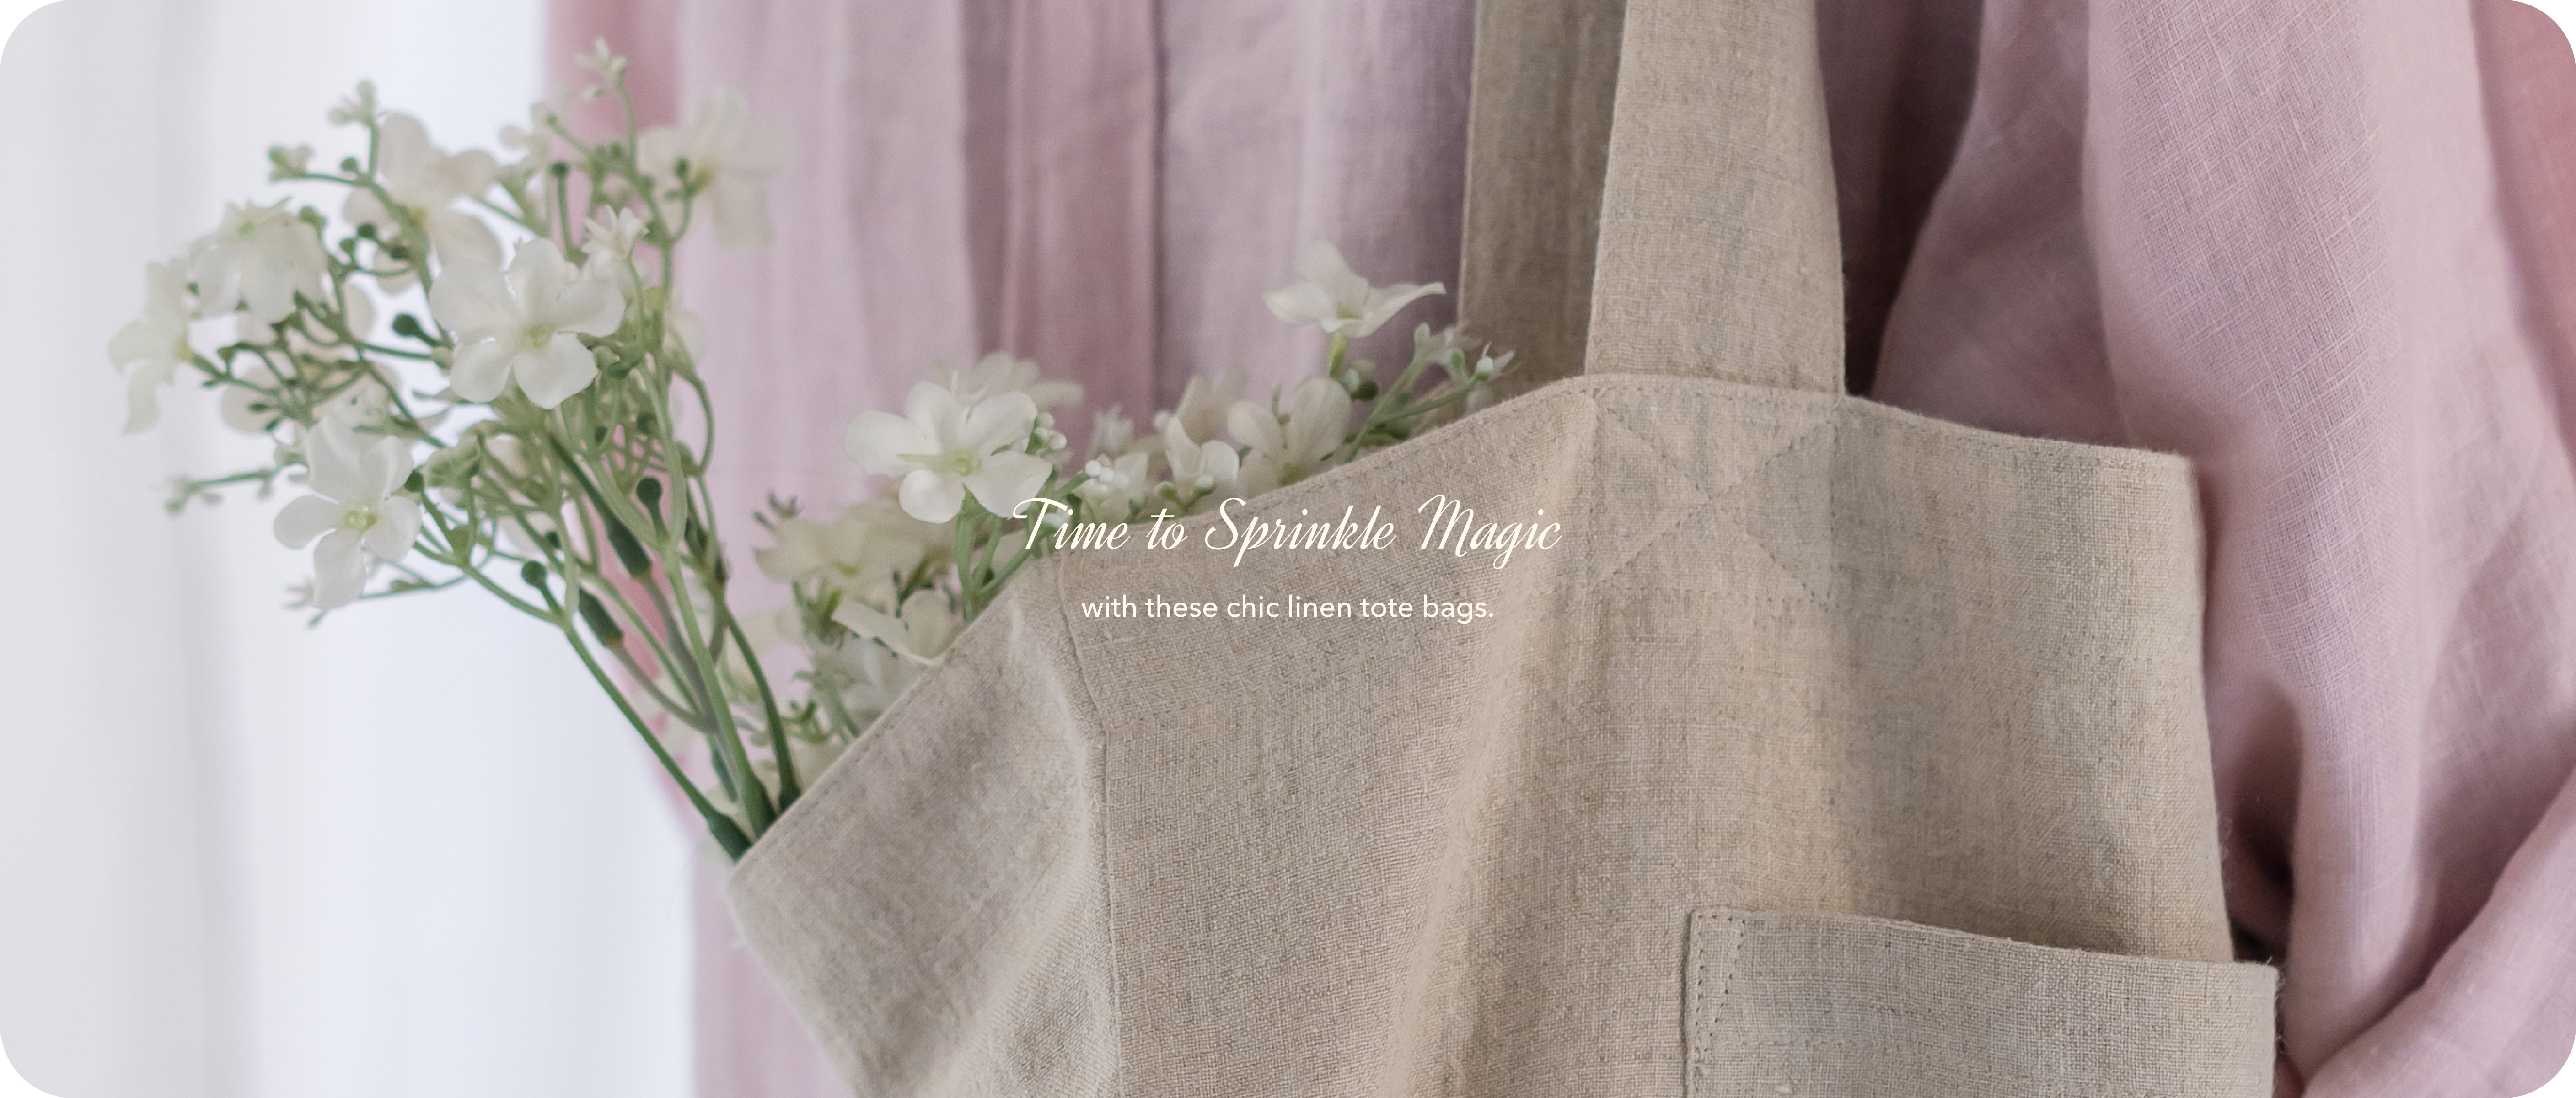 100% Pure Linen Bags and Totebags